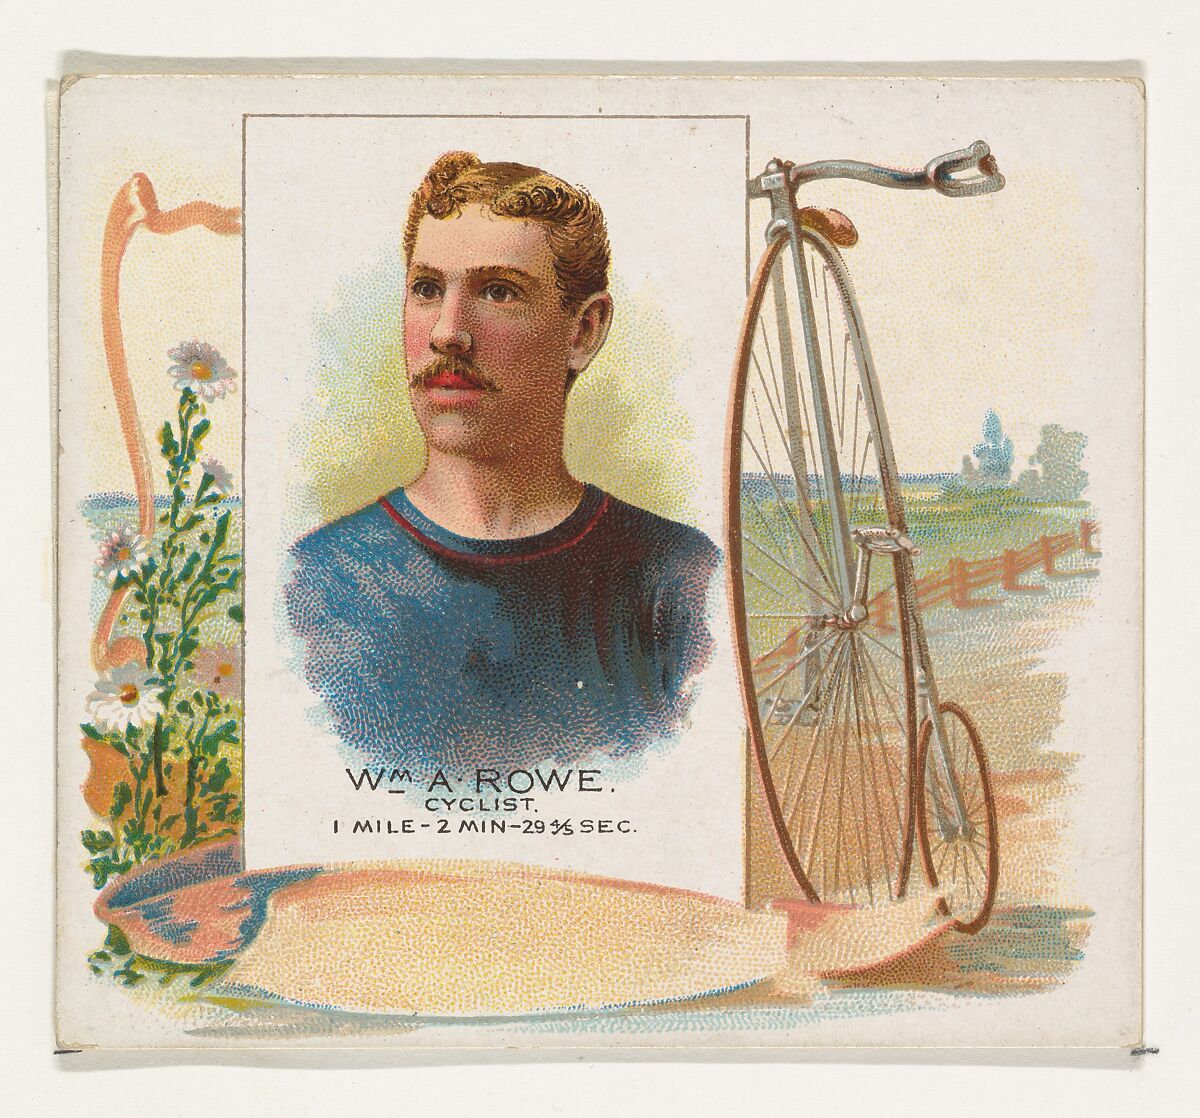 William A. Rowe, Cyclist, from World's Champions, Second Series (N43) for Allen & Ginter Cigarettes, Allen &amp; Ginter (American, Richmond, Virginia), Commercial lithograph 